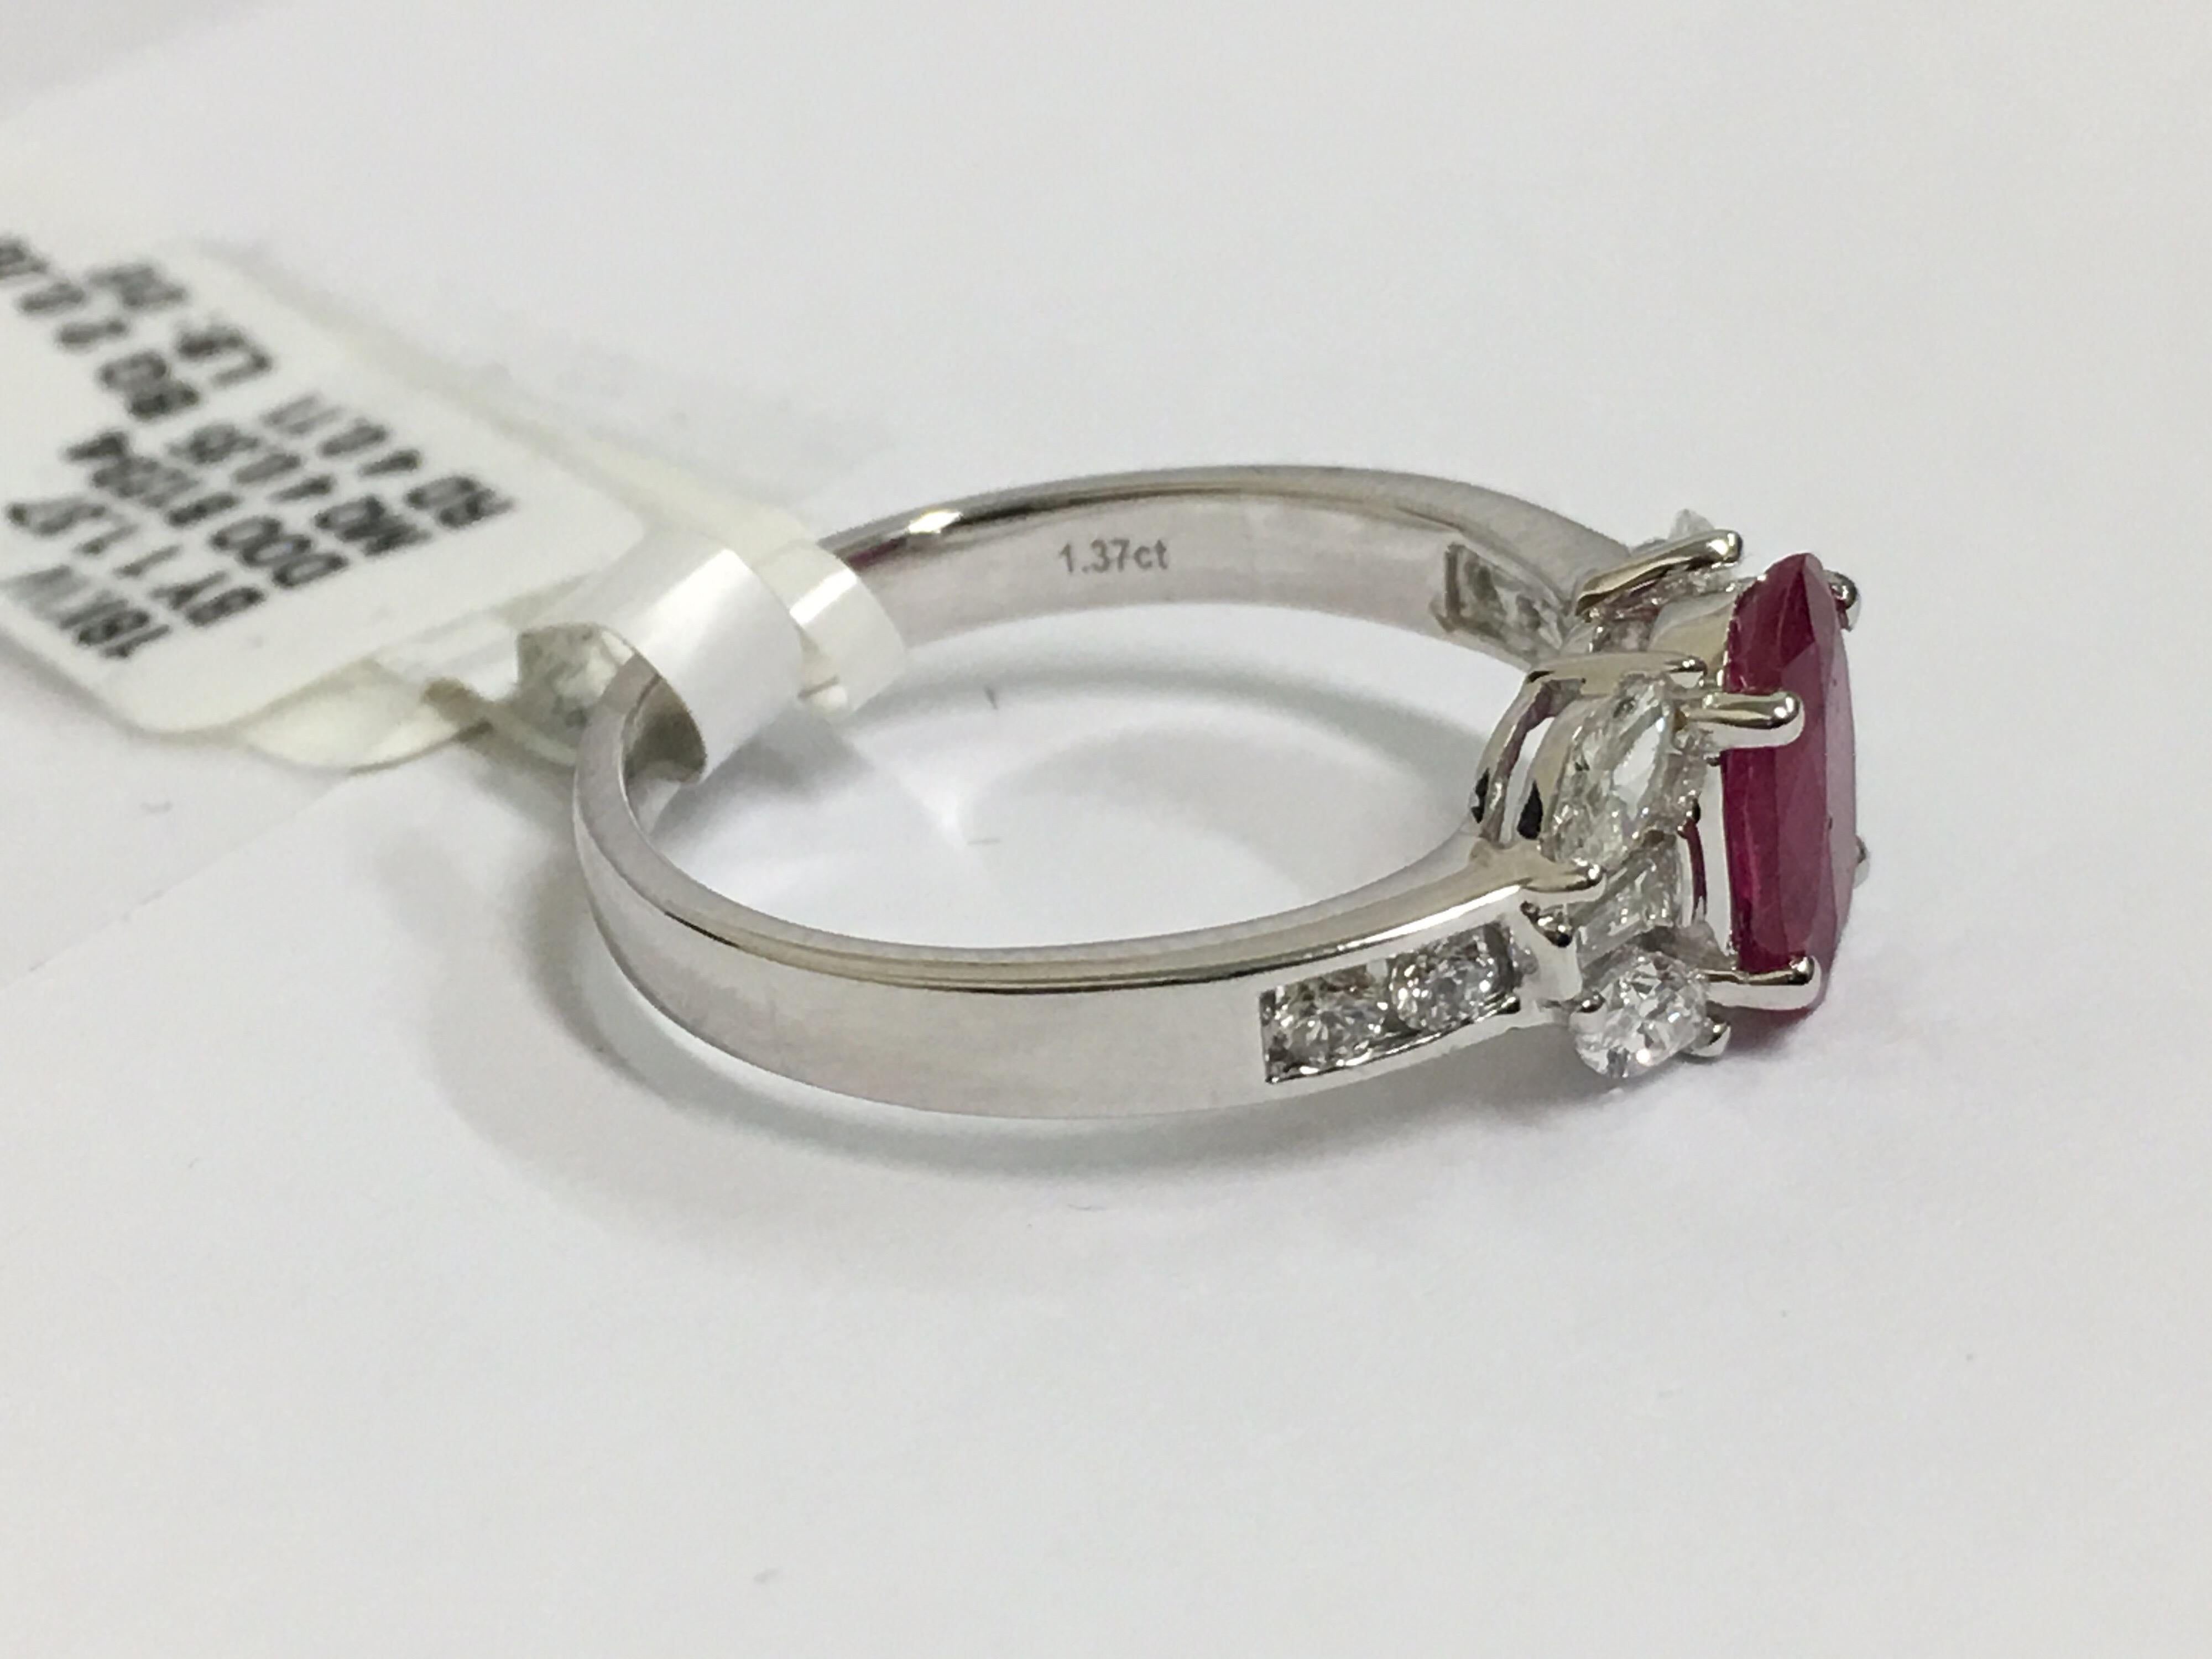 Natural Ruby weight is 1.37 Carat.
Diamonds weight is 0.46 Carat.
Size of the ring is 7 but can be resized.
Ring is set in 18 Karat White Gold.